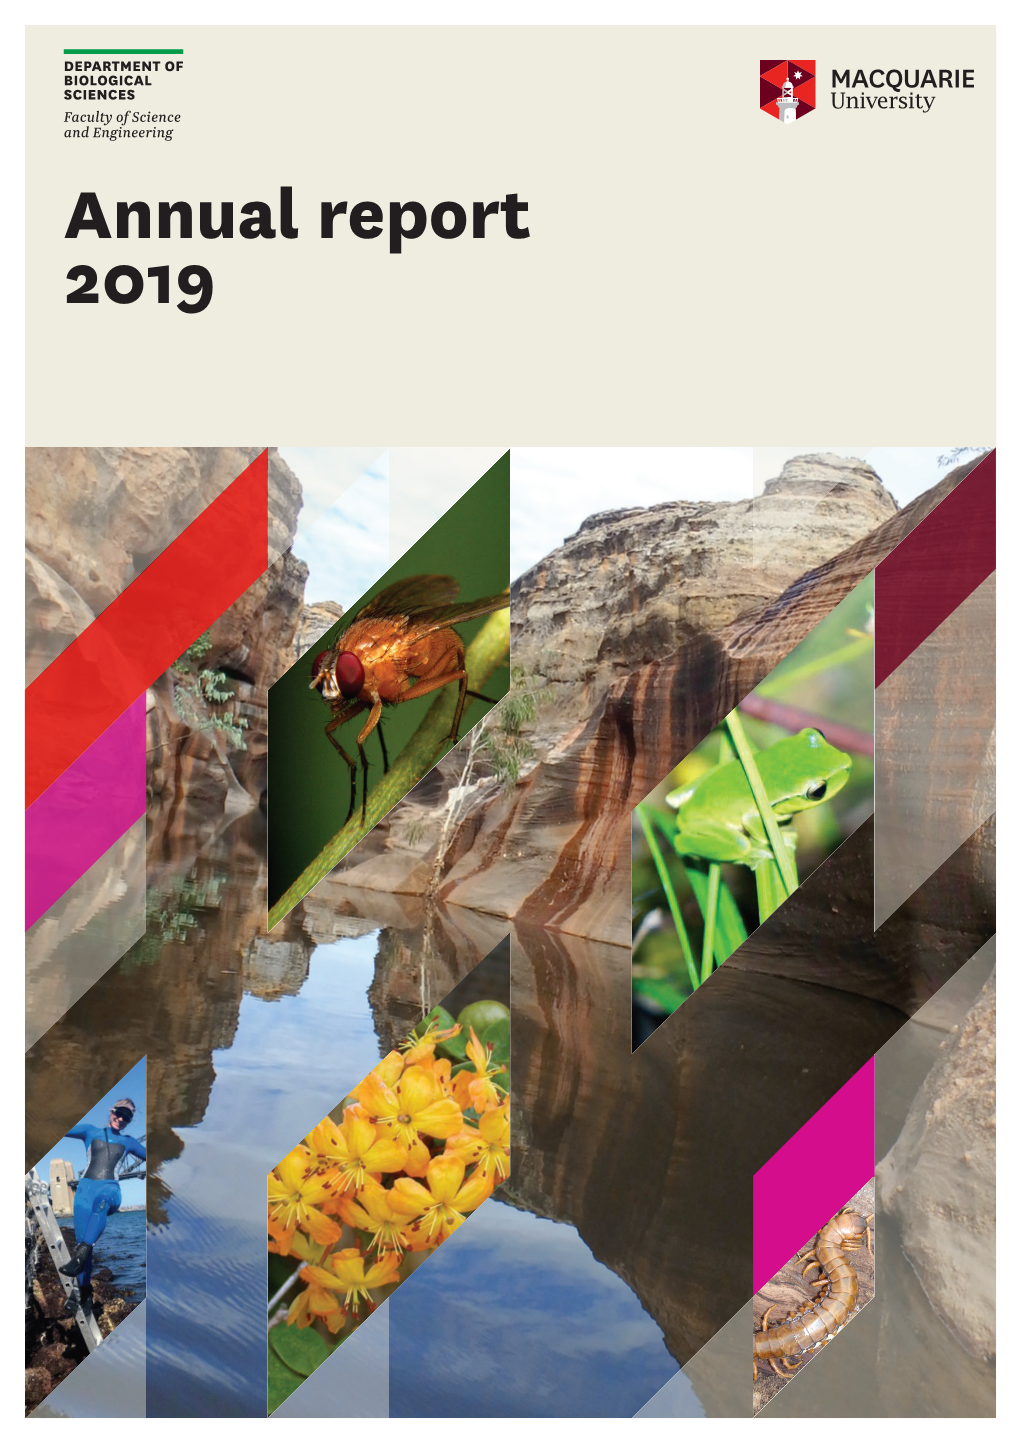 Annual Report 2019 Welcome from the Head of Department 2019 – CELEBRATING EXCELLENCE in RESEARCH, TEACHING and SERVICE